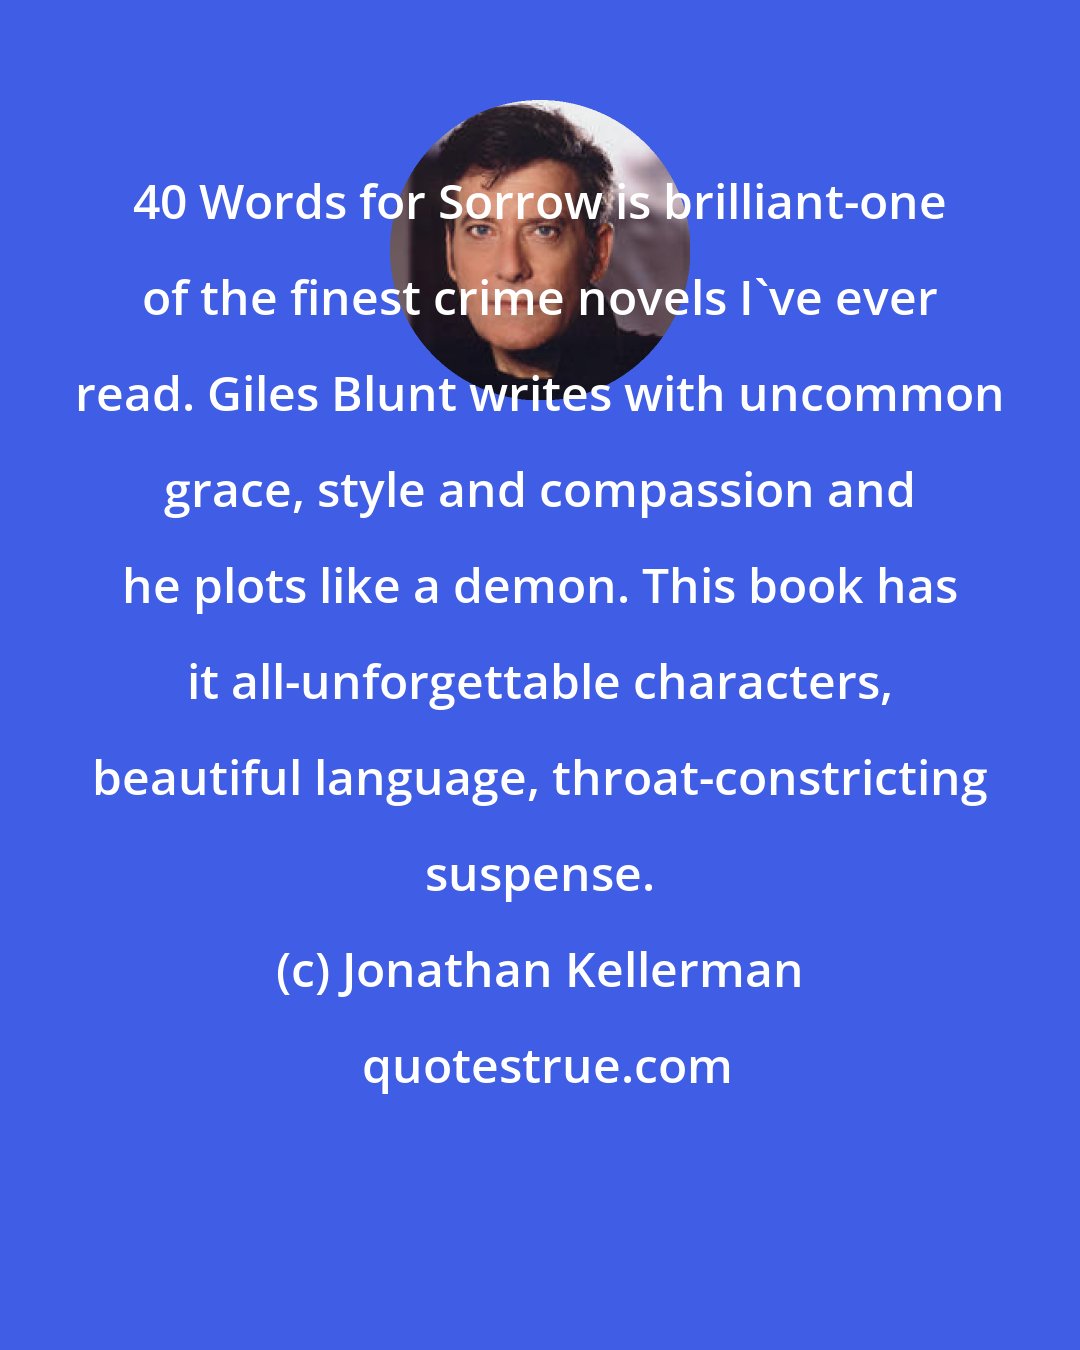 Jonathan Kellerman: 40 Words for Sorrow is brilliant-one of the finest crime novels I've ever read. Giles Blunt writes with uncommon grace, style and compassion and he plots like a demon. This book has it all-unforgettable characters, beautiful language, throat-constricting suspense.